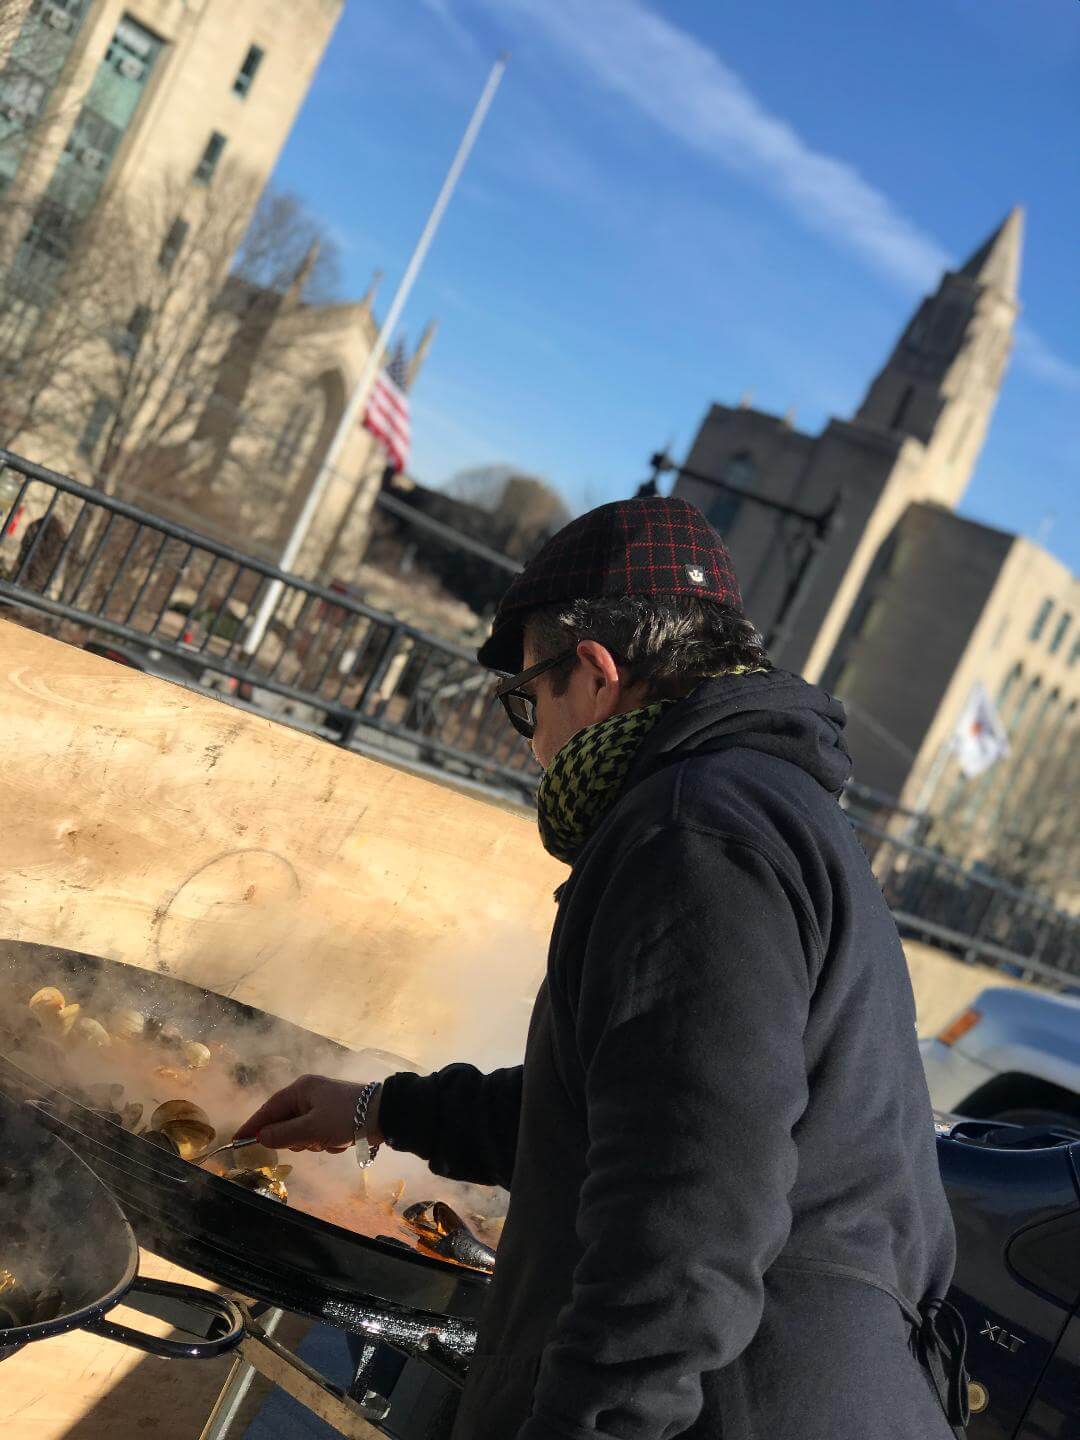 A man Cooking at the Boston University Christmas Party